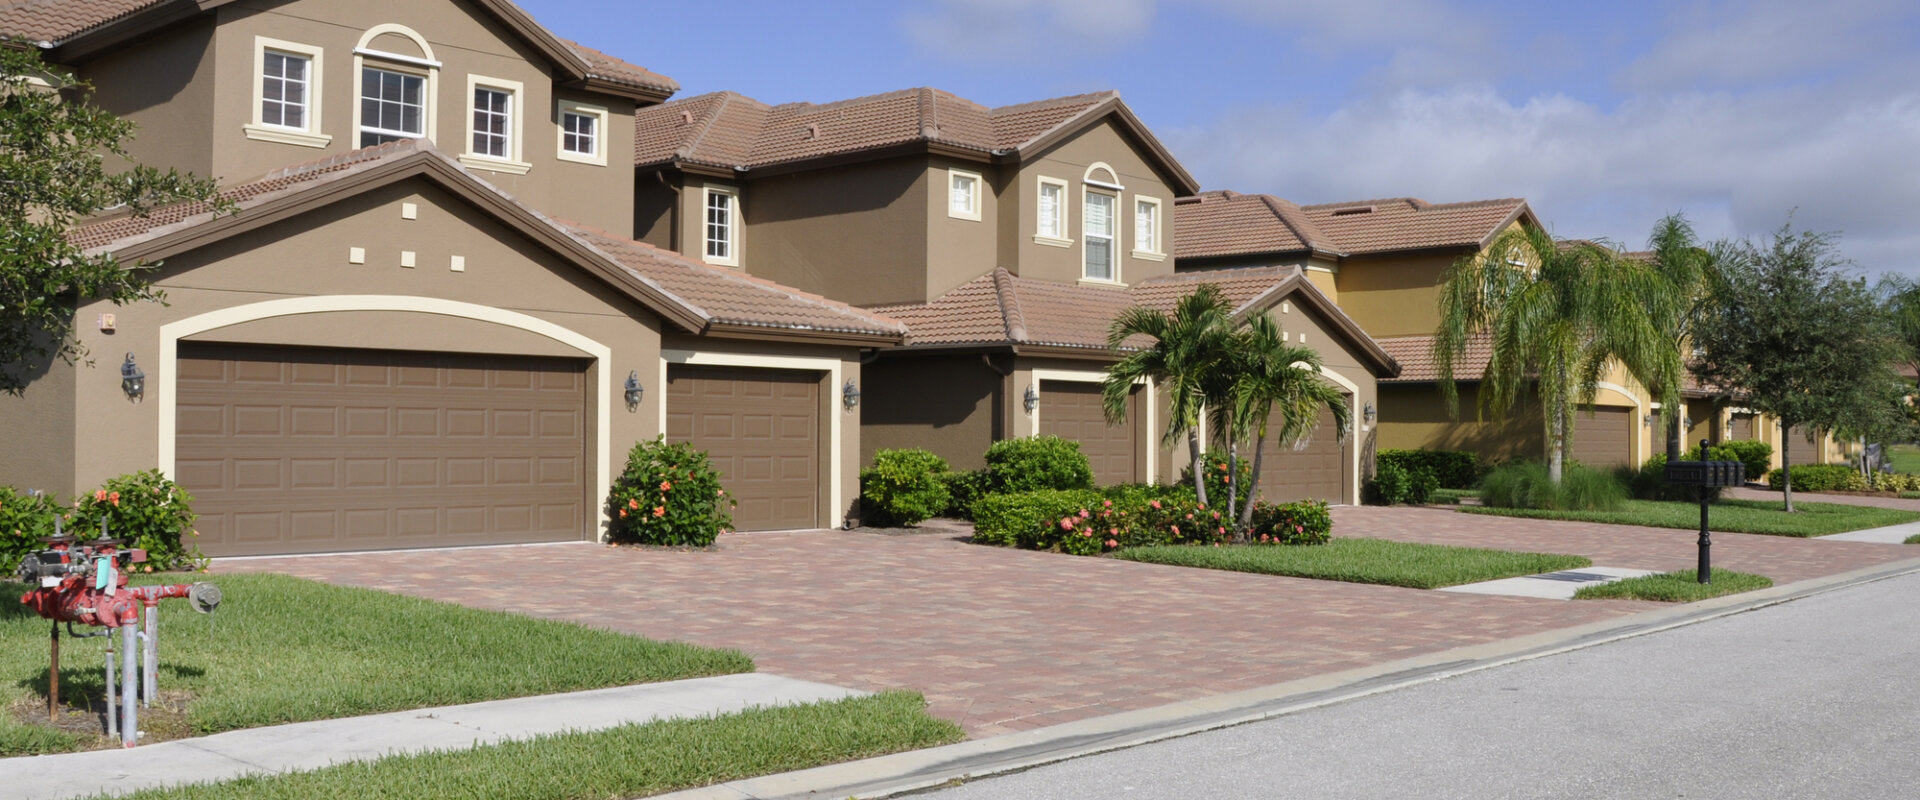 Sell Your House Fast In Fort Lauderdale, Florida